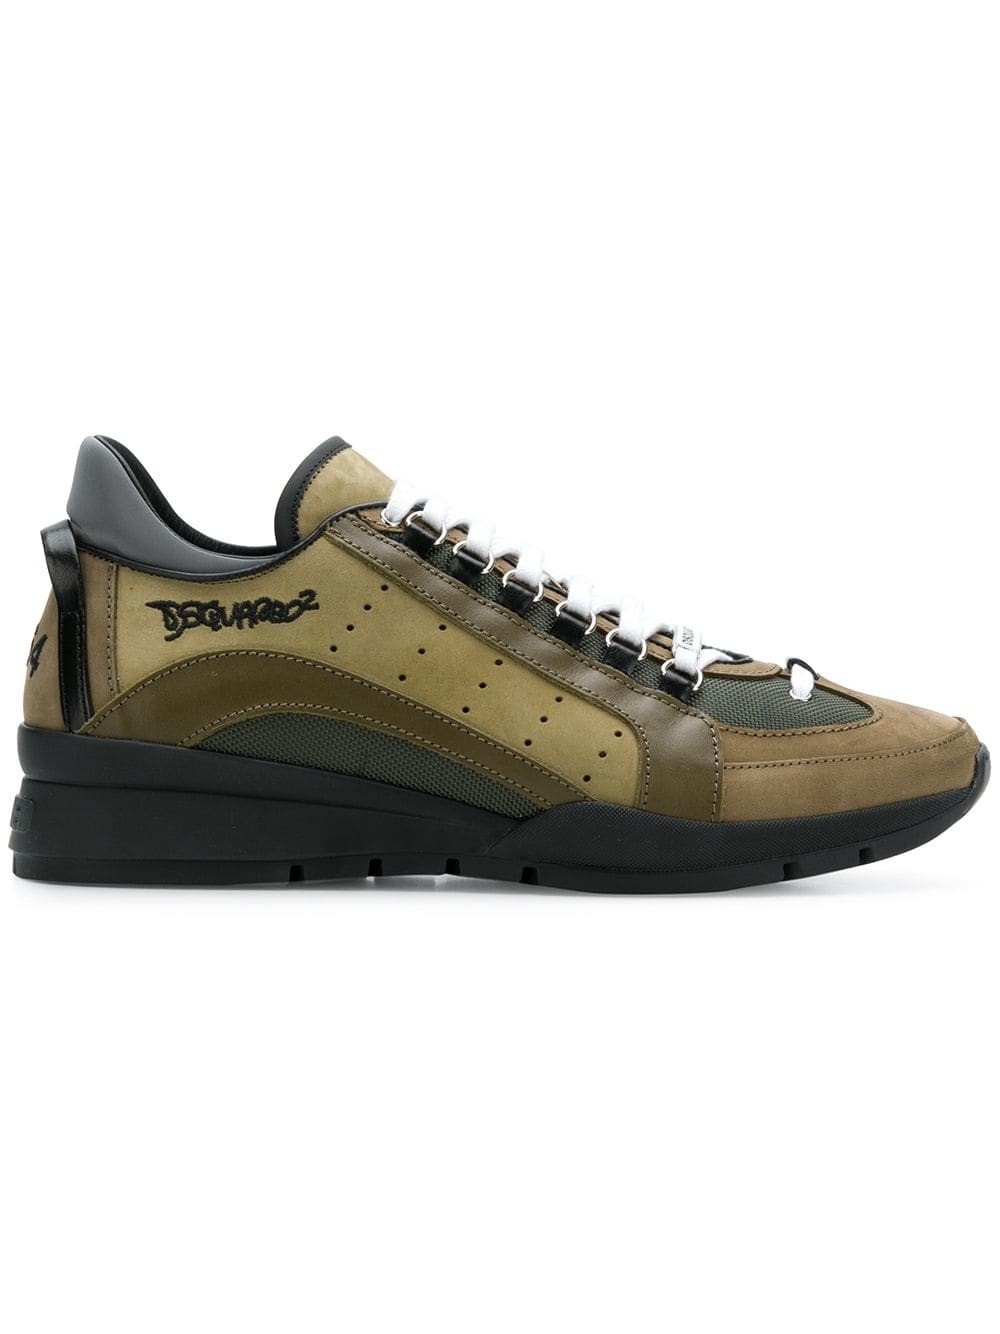 DSQUARED2 551 Sneakers, $332 | | Lookastic